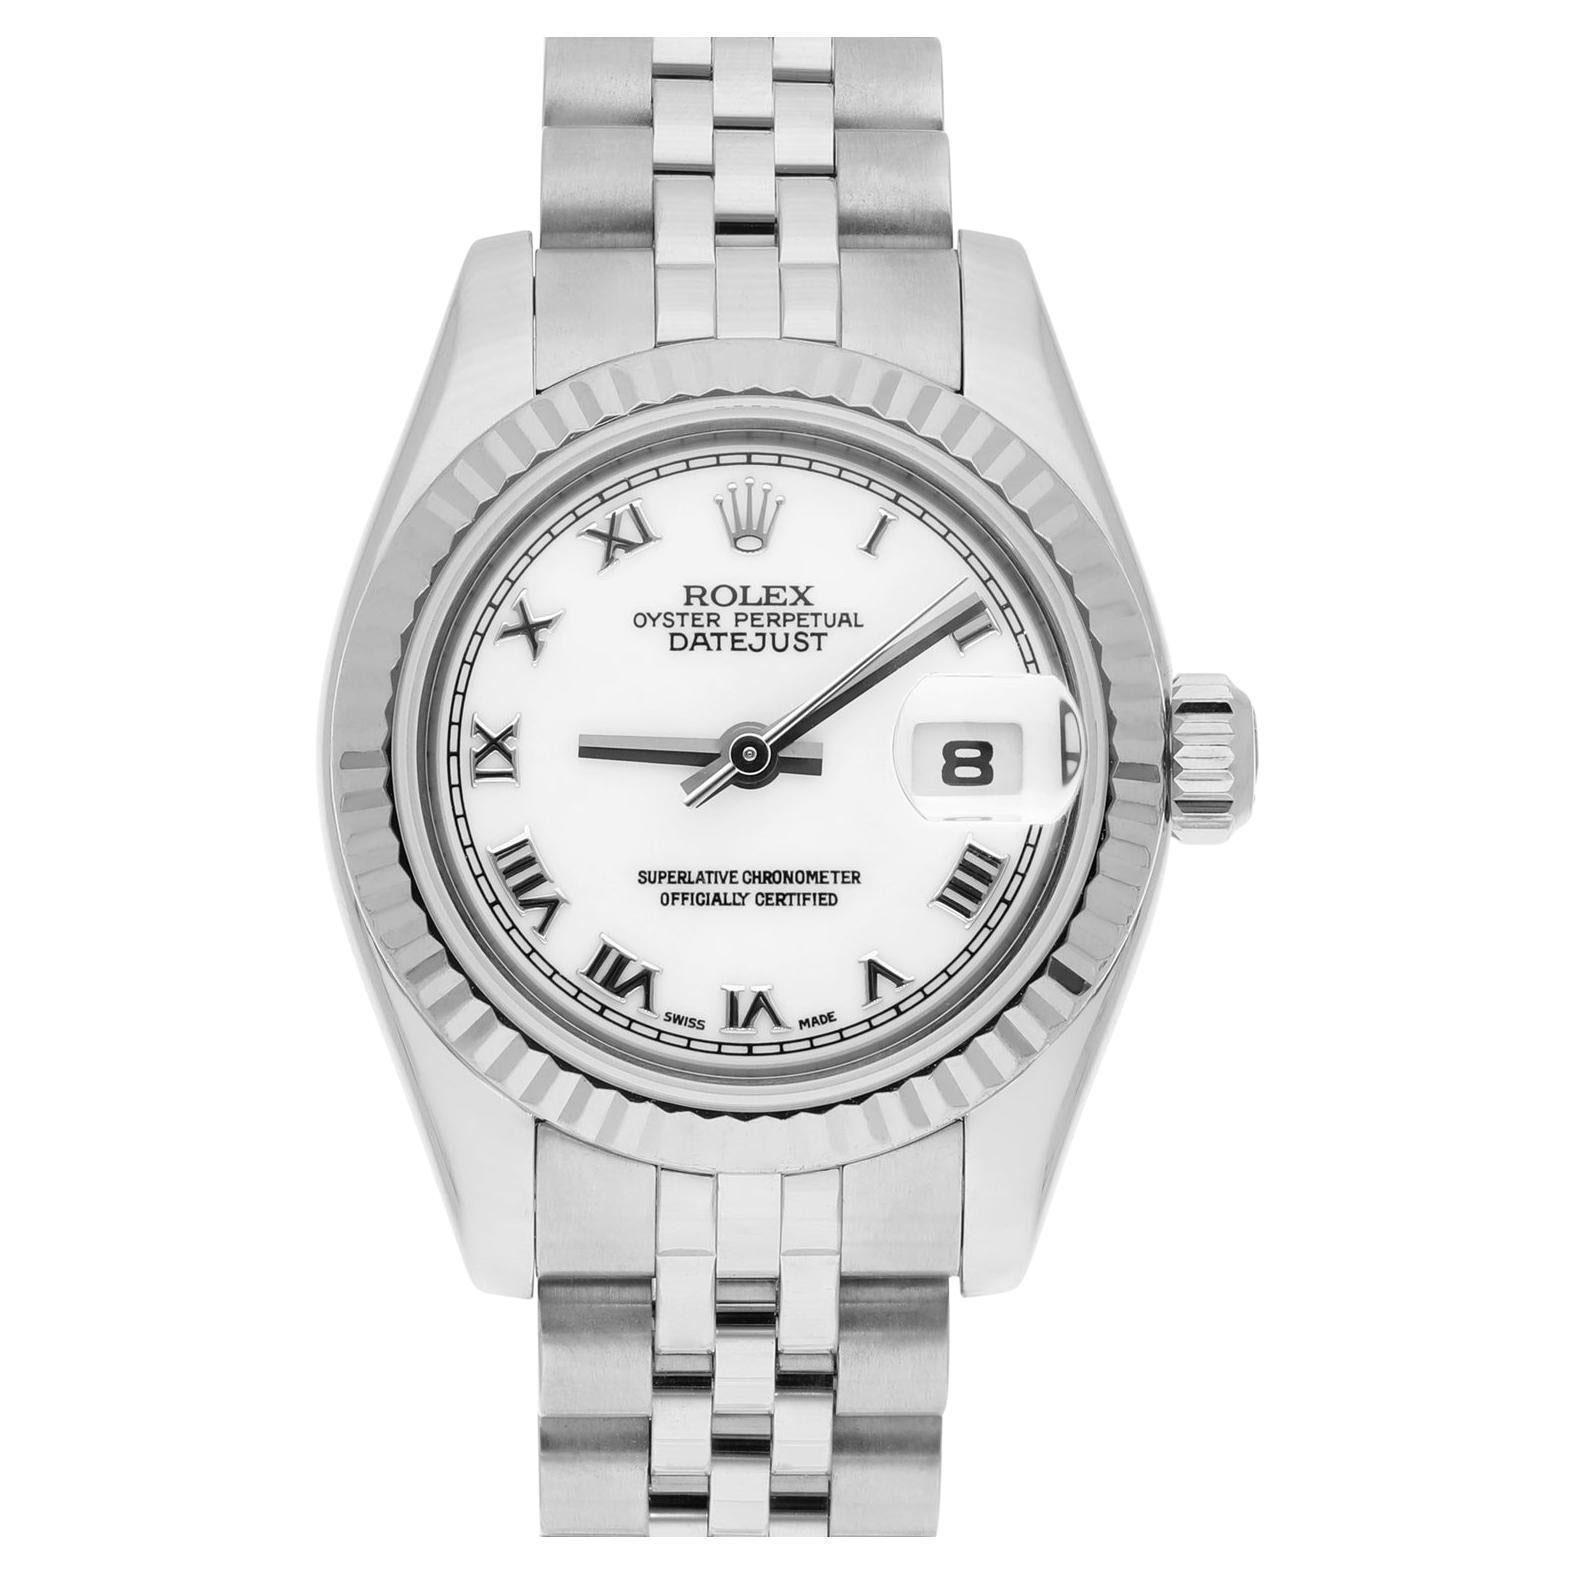 Rolex Lady-Datejust 26mm 179174 Steel & White Gold Watch Roman Dial Complete! For Sale